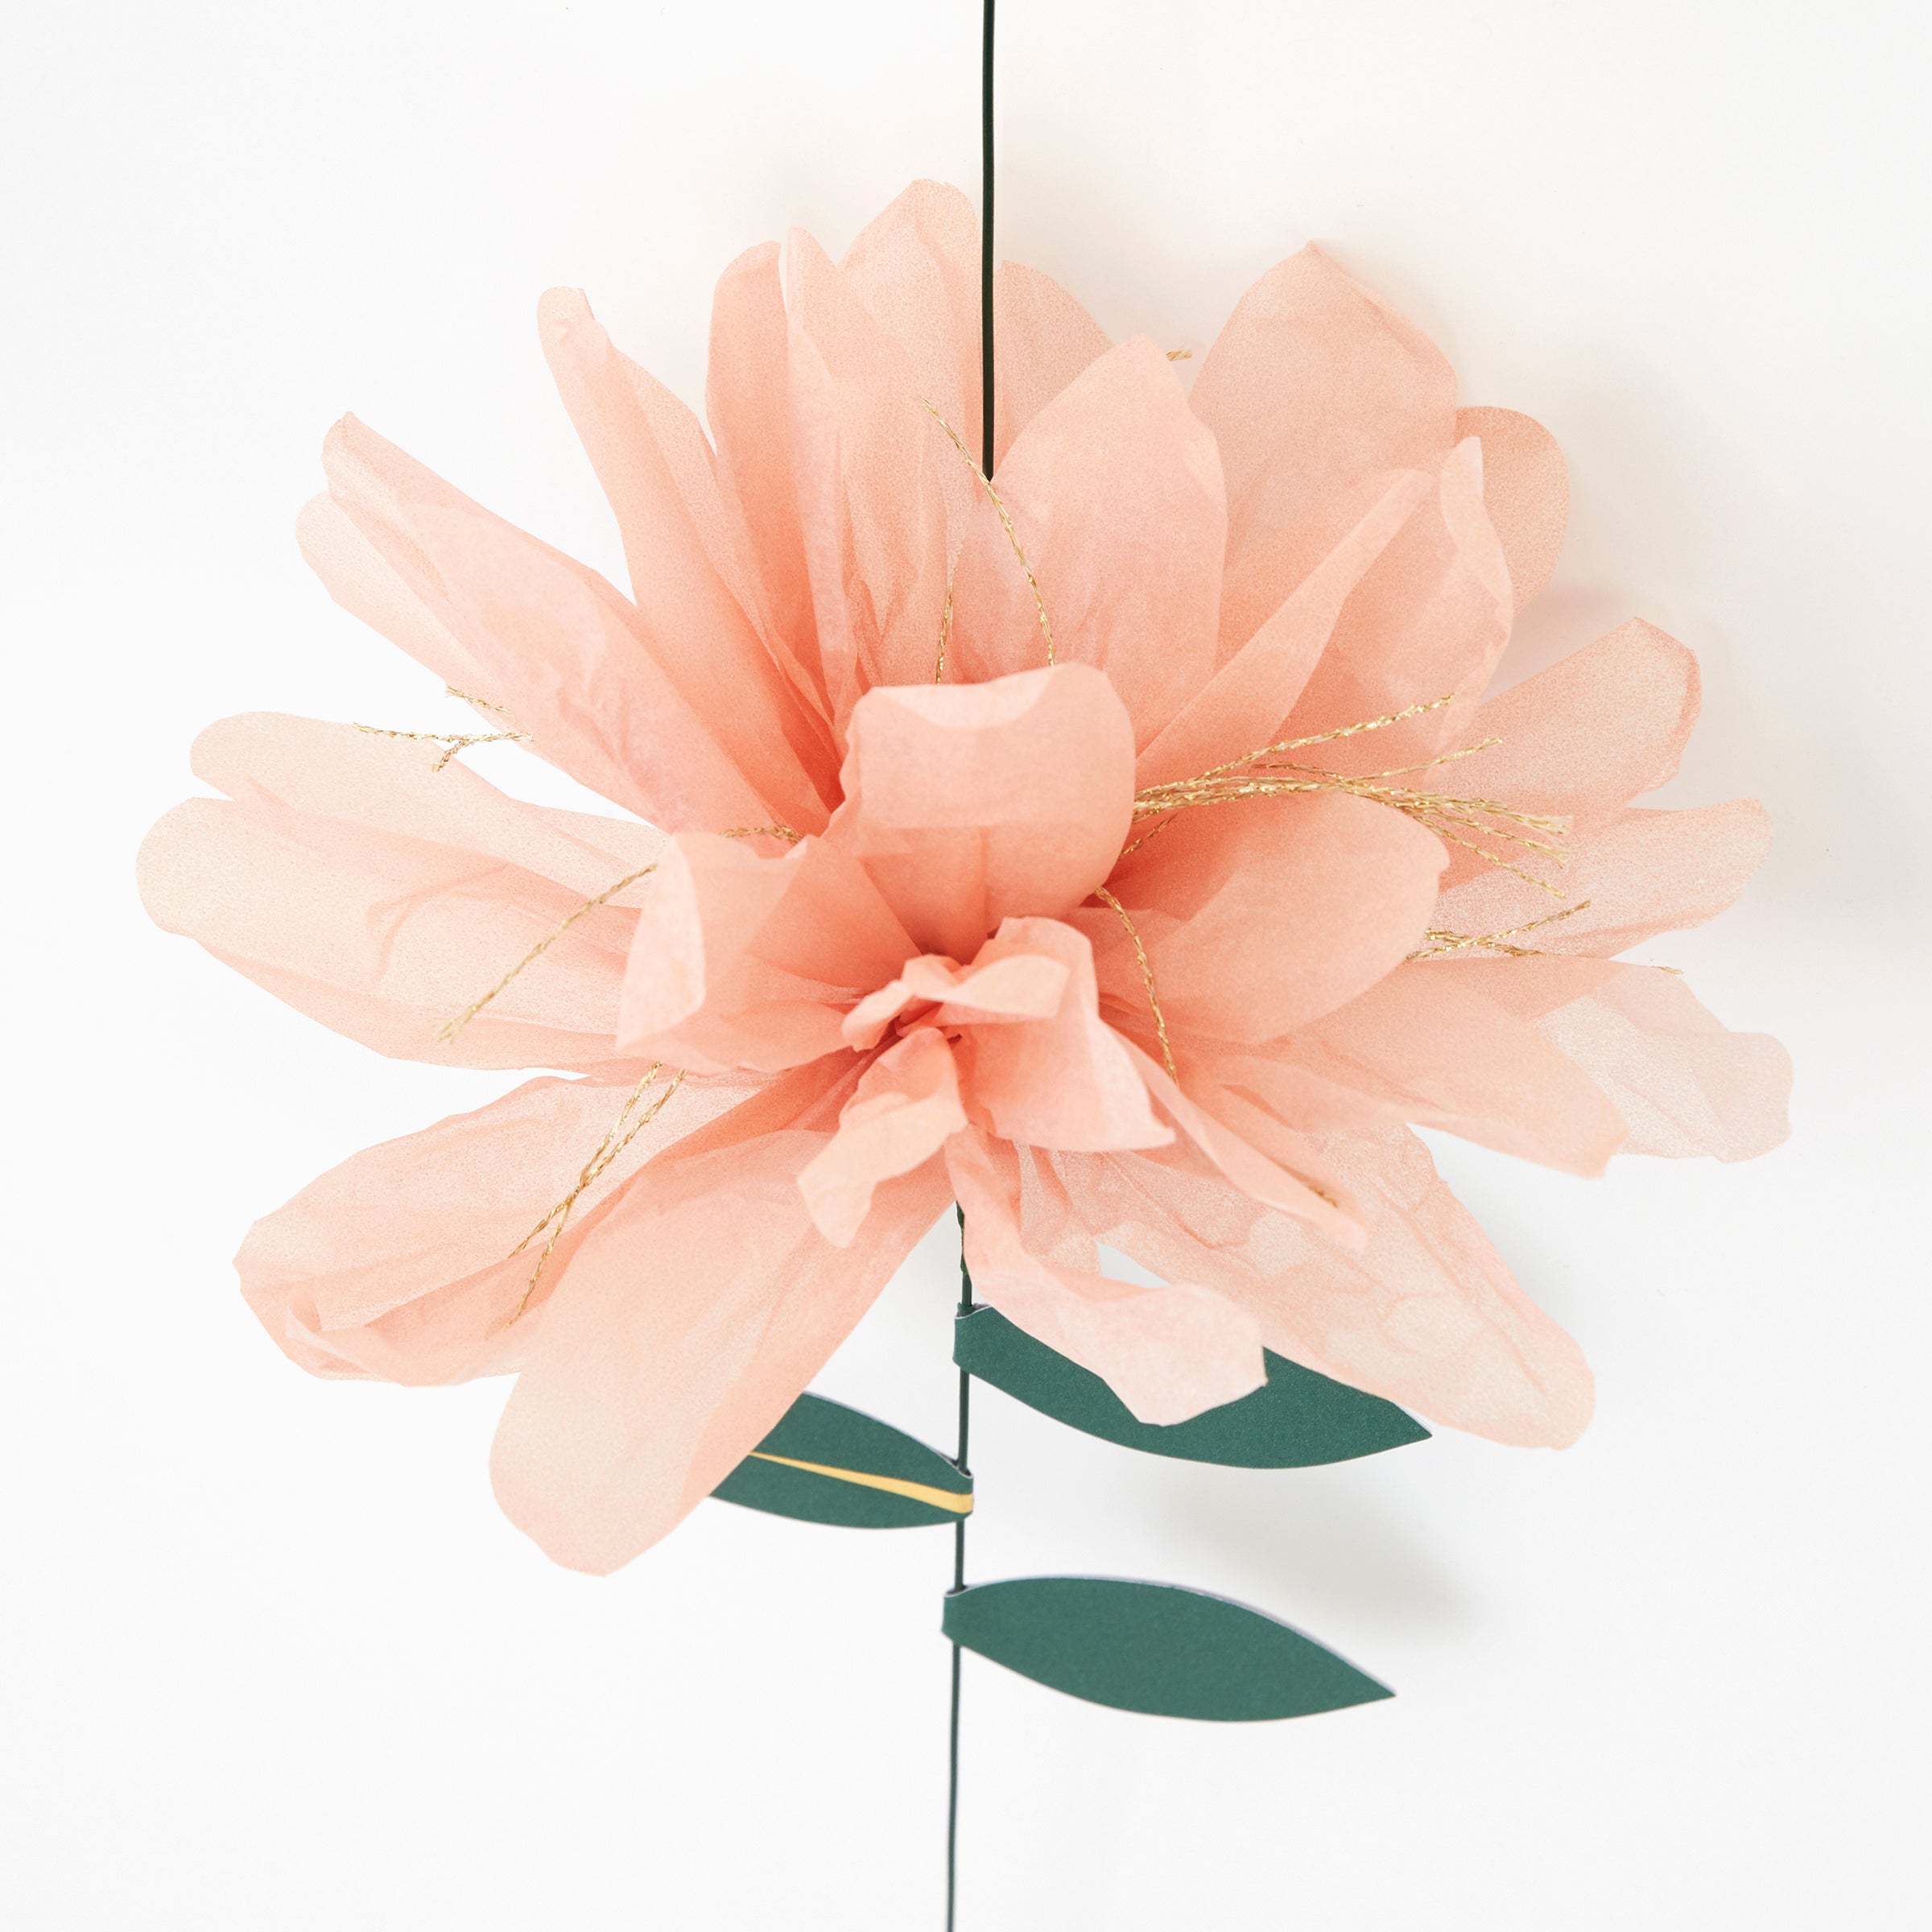 This fabulous flower decoration is crafted from colourful tissue paper flowers, with gold foil  and green leaves.